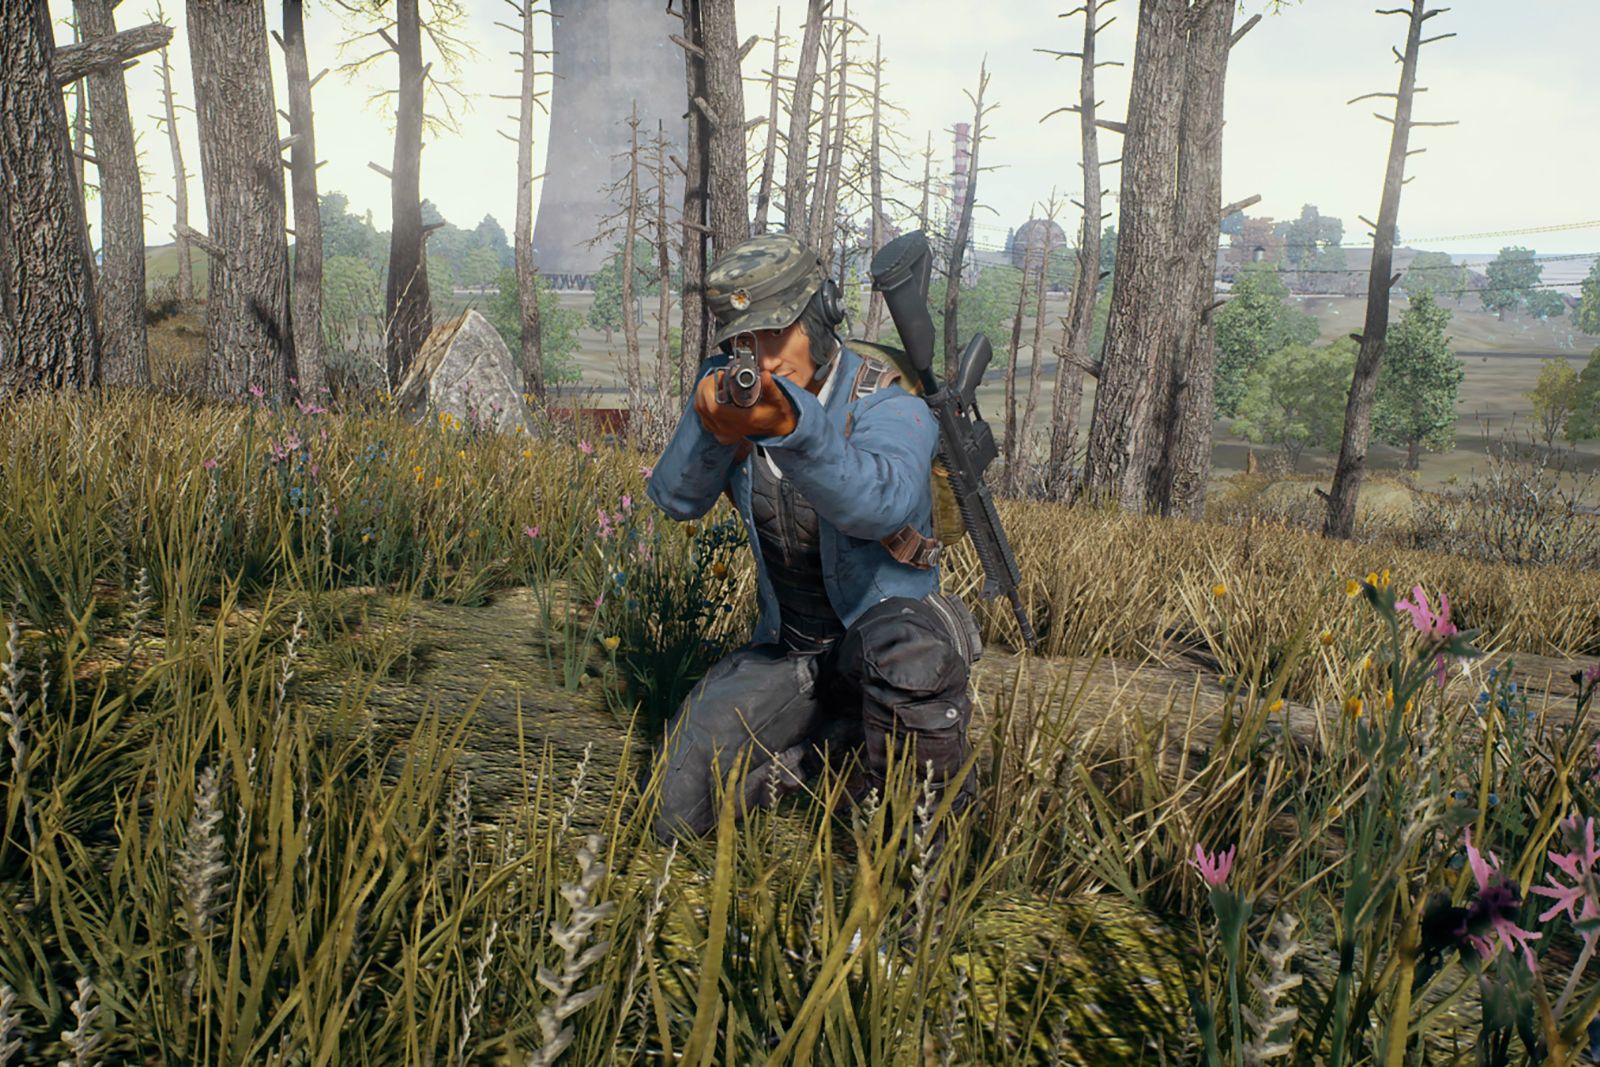 PUBG free to play on Xbox One image 1